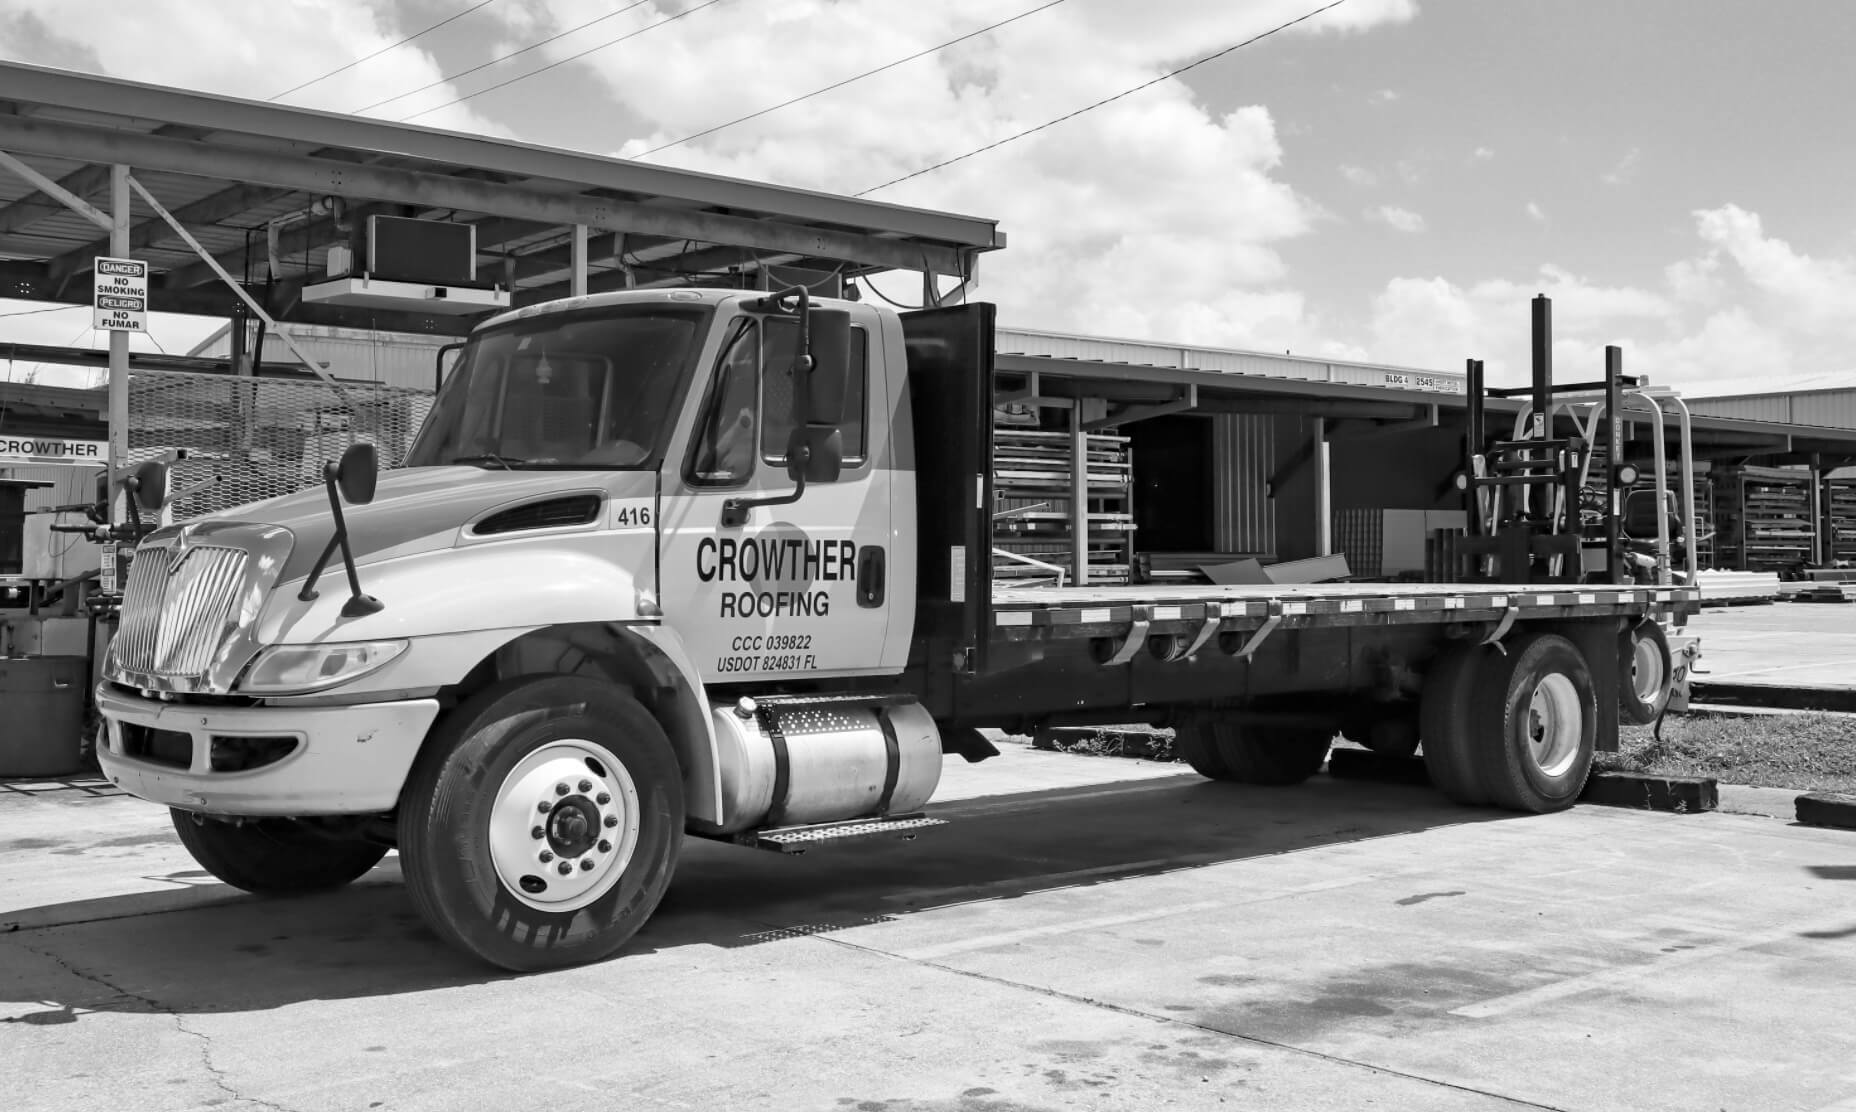 Crowther Roofing and Cooling flatbed equipment for roof replacement and roof repairs in Lee County, FL.